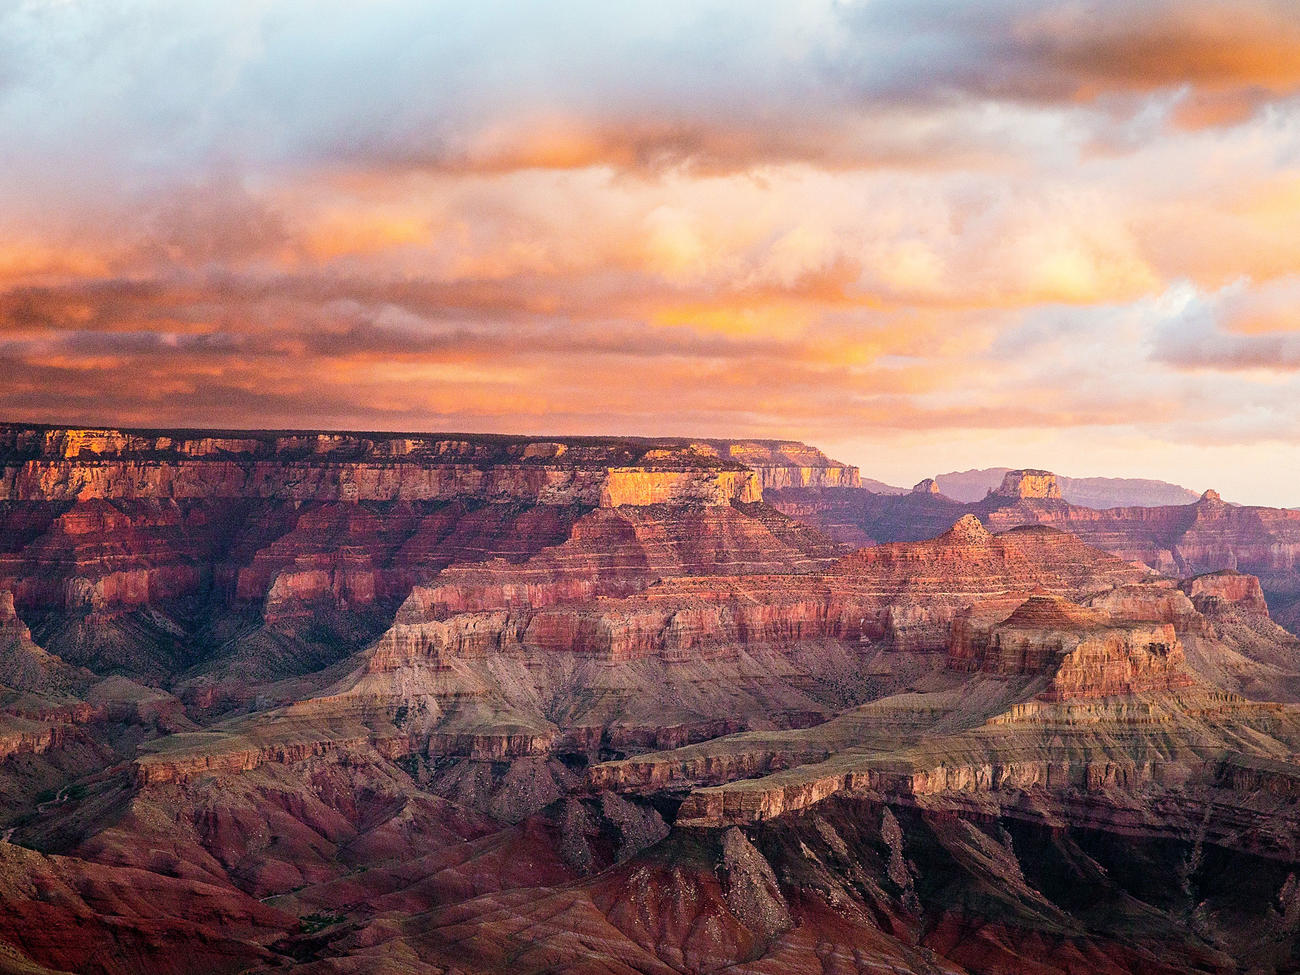 Top Wow Spots of Grand Canyon